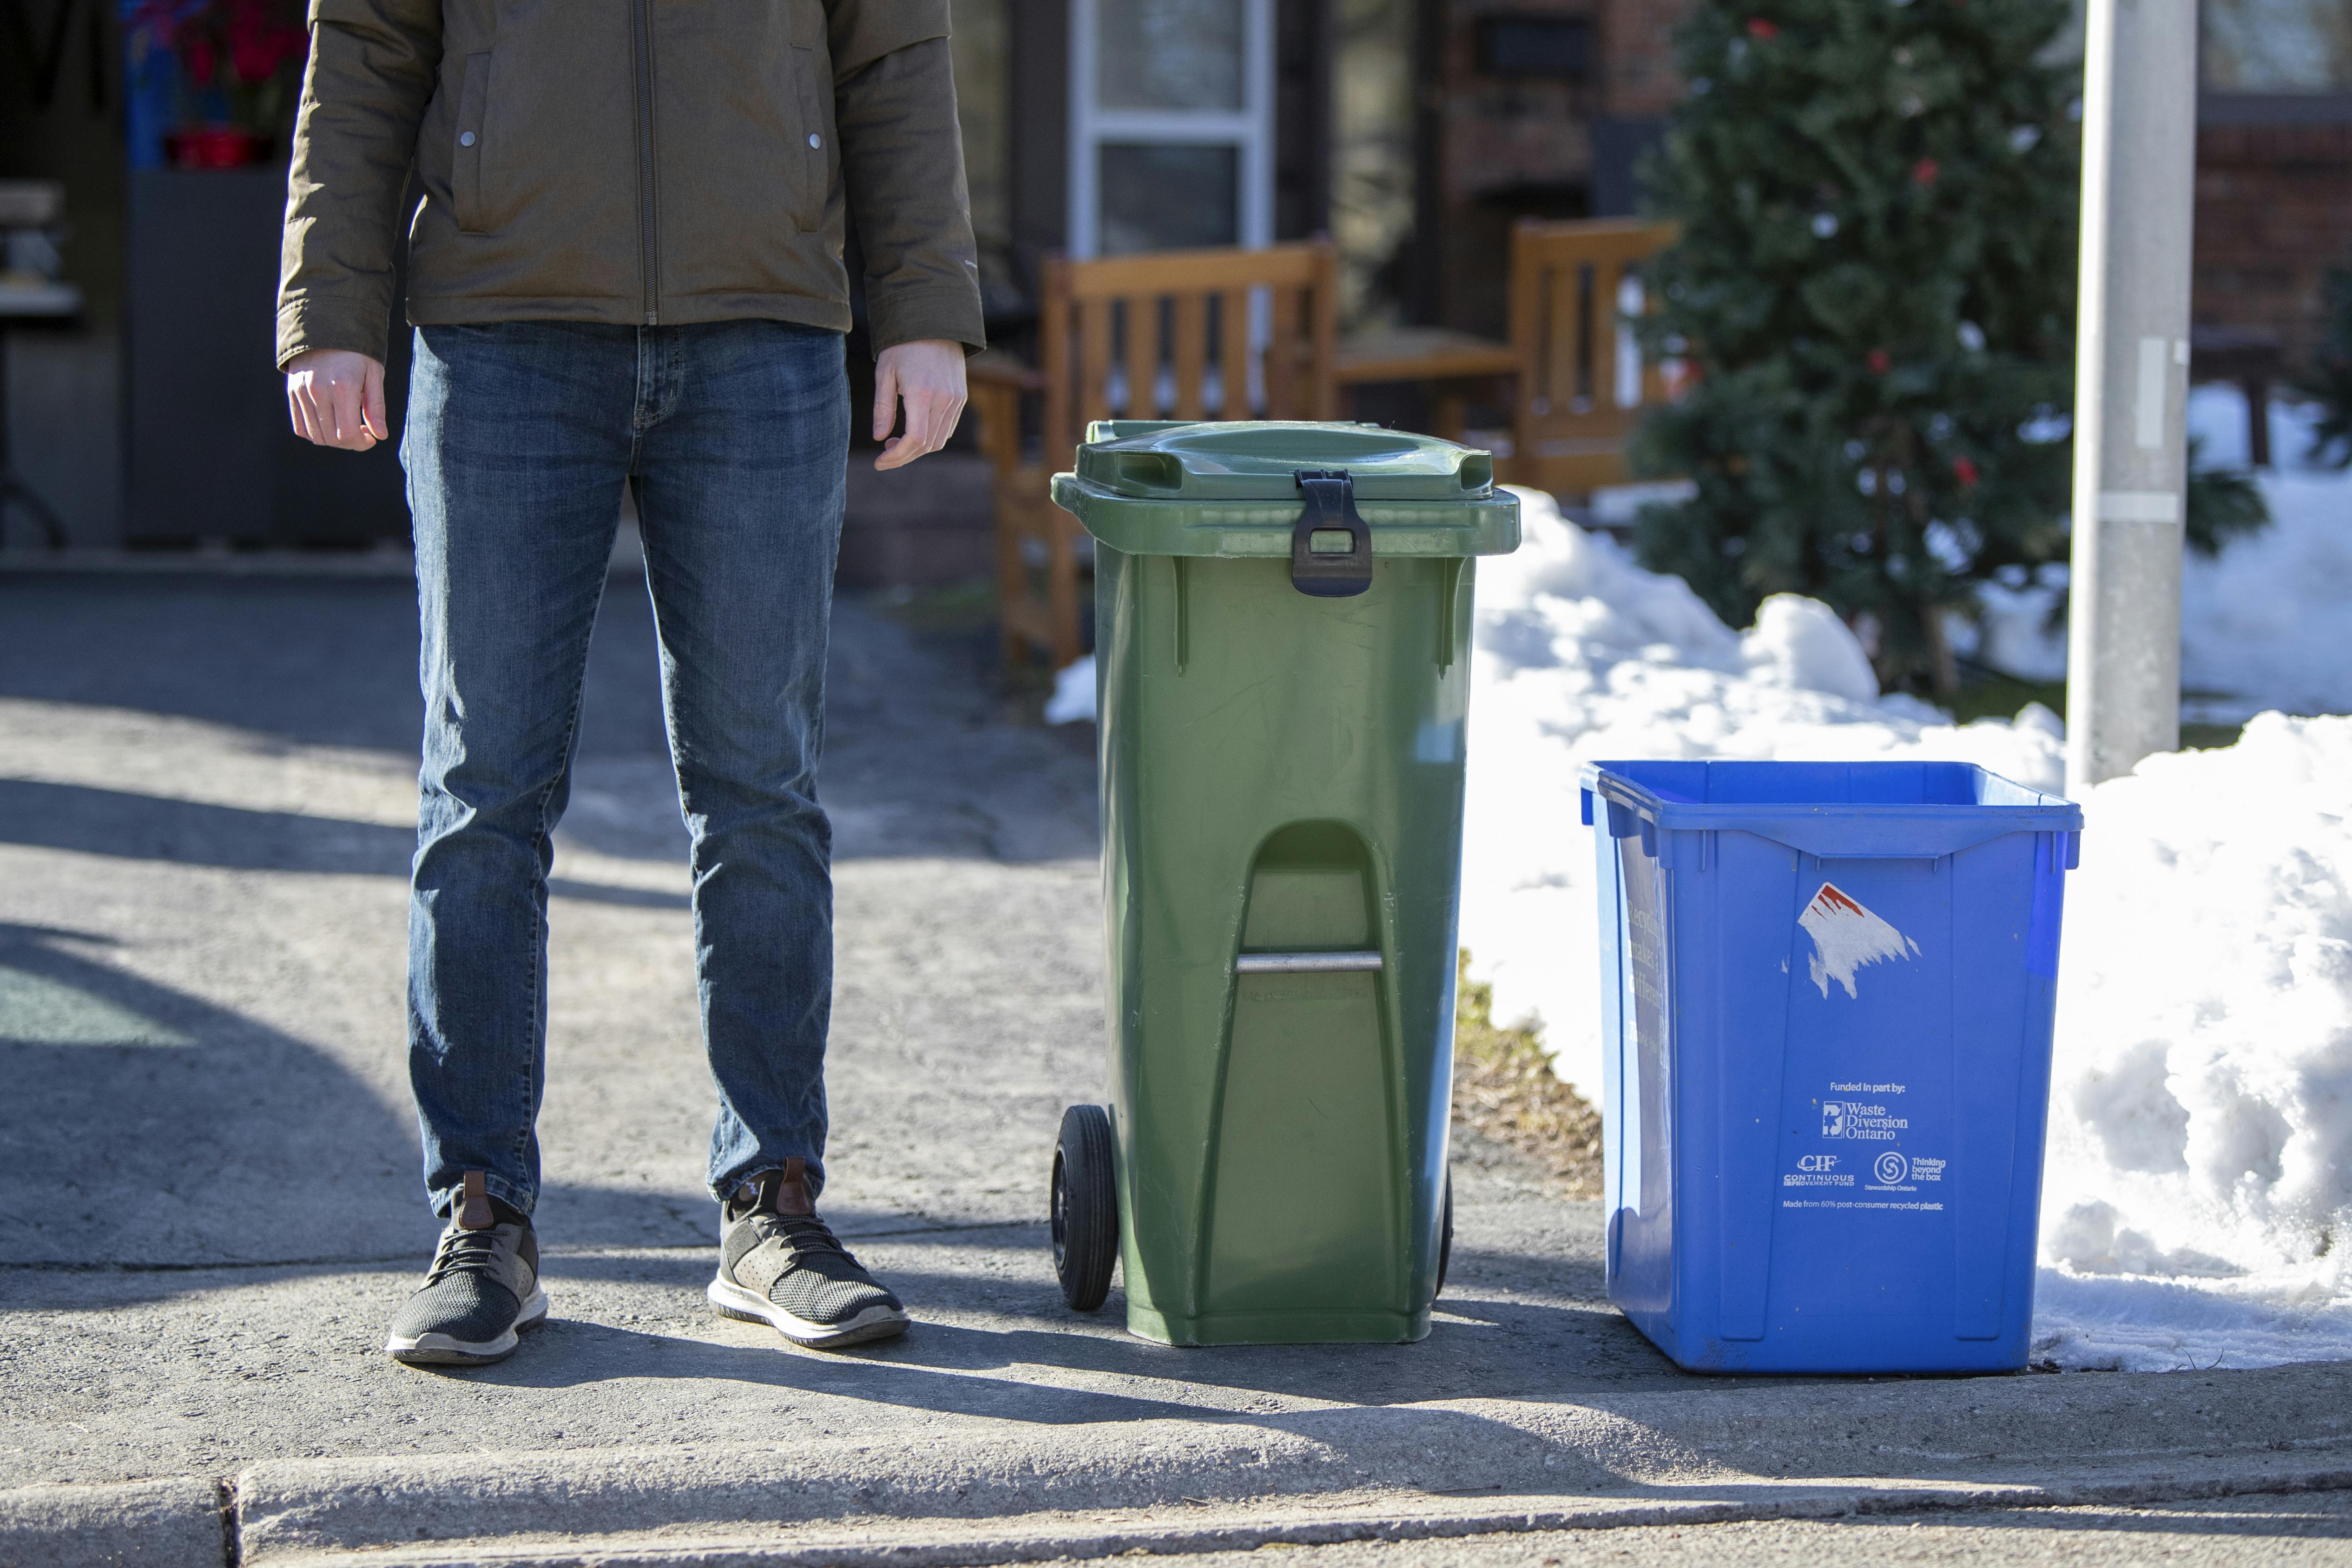 A medium size Green Bin placed at the curb